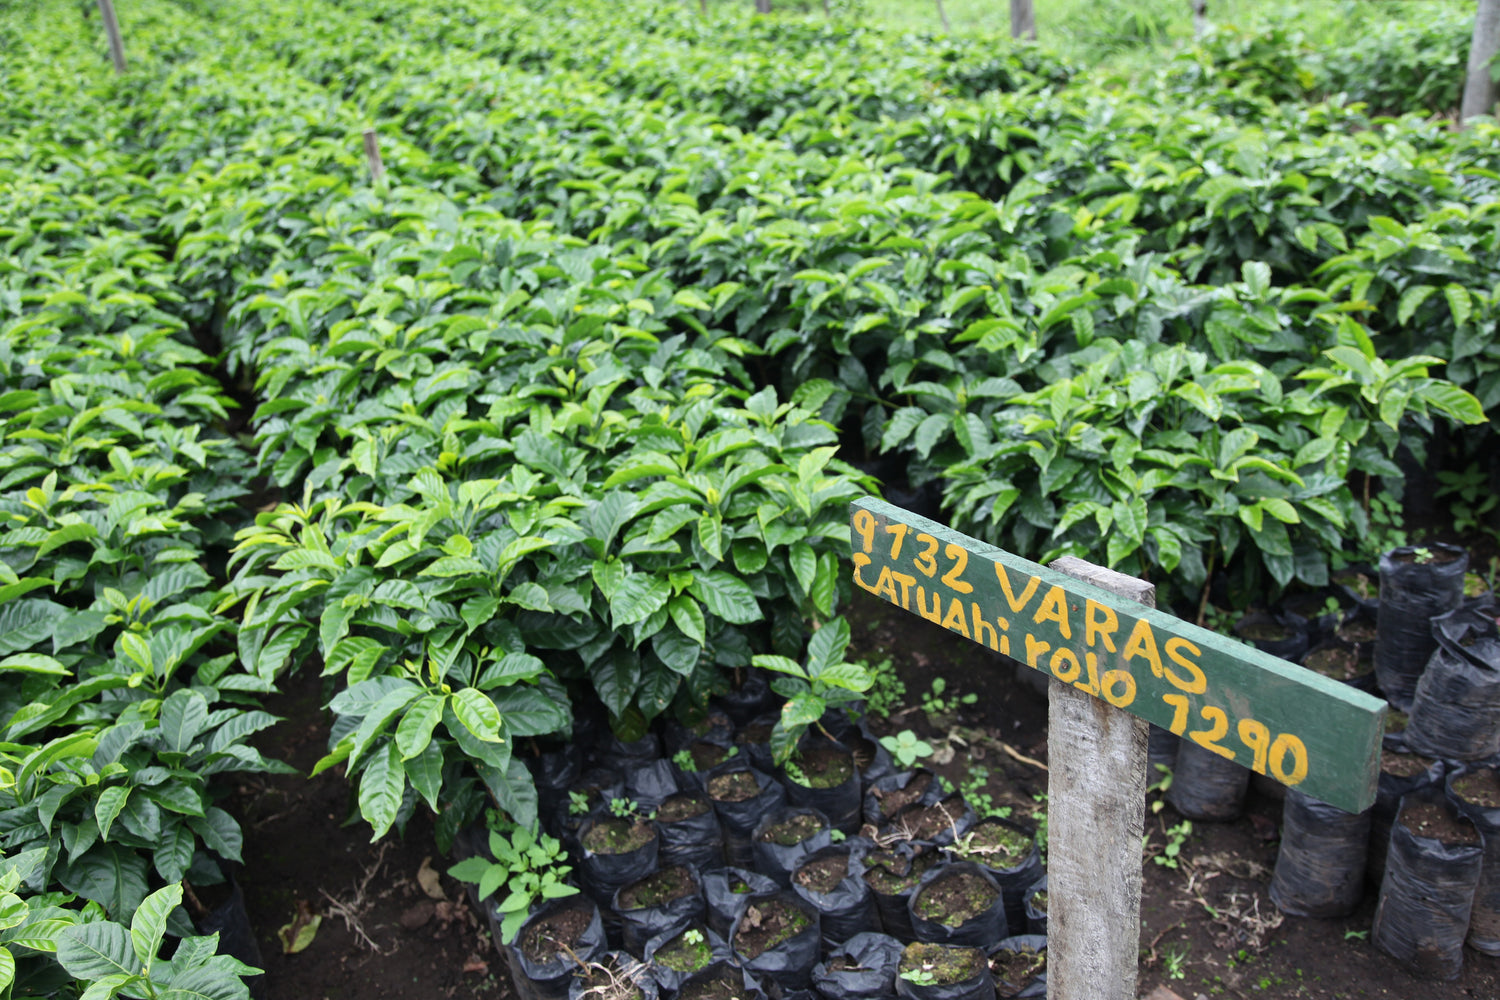 Red Caturra growing at 1,290 m.a.s.l. in Nicaragua